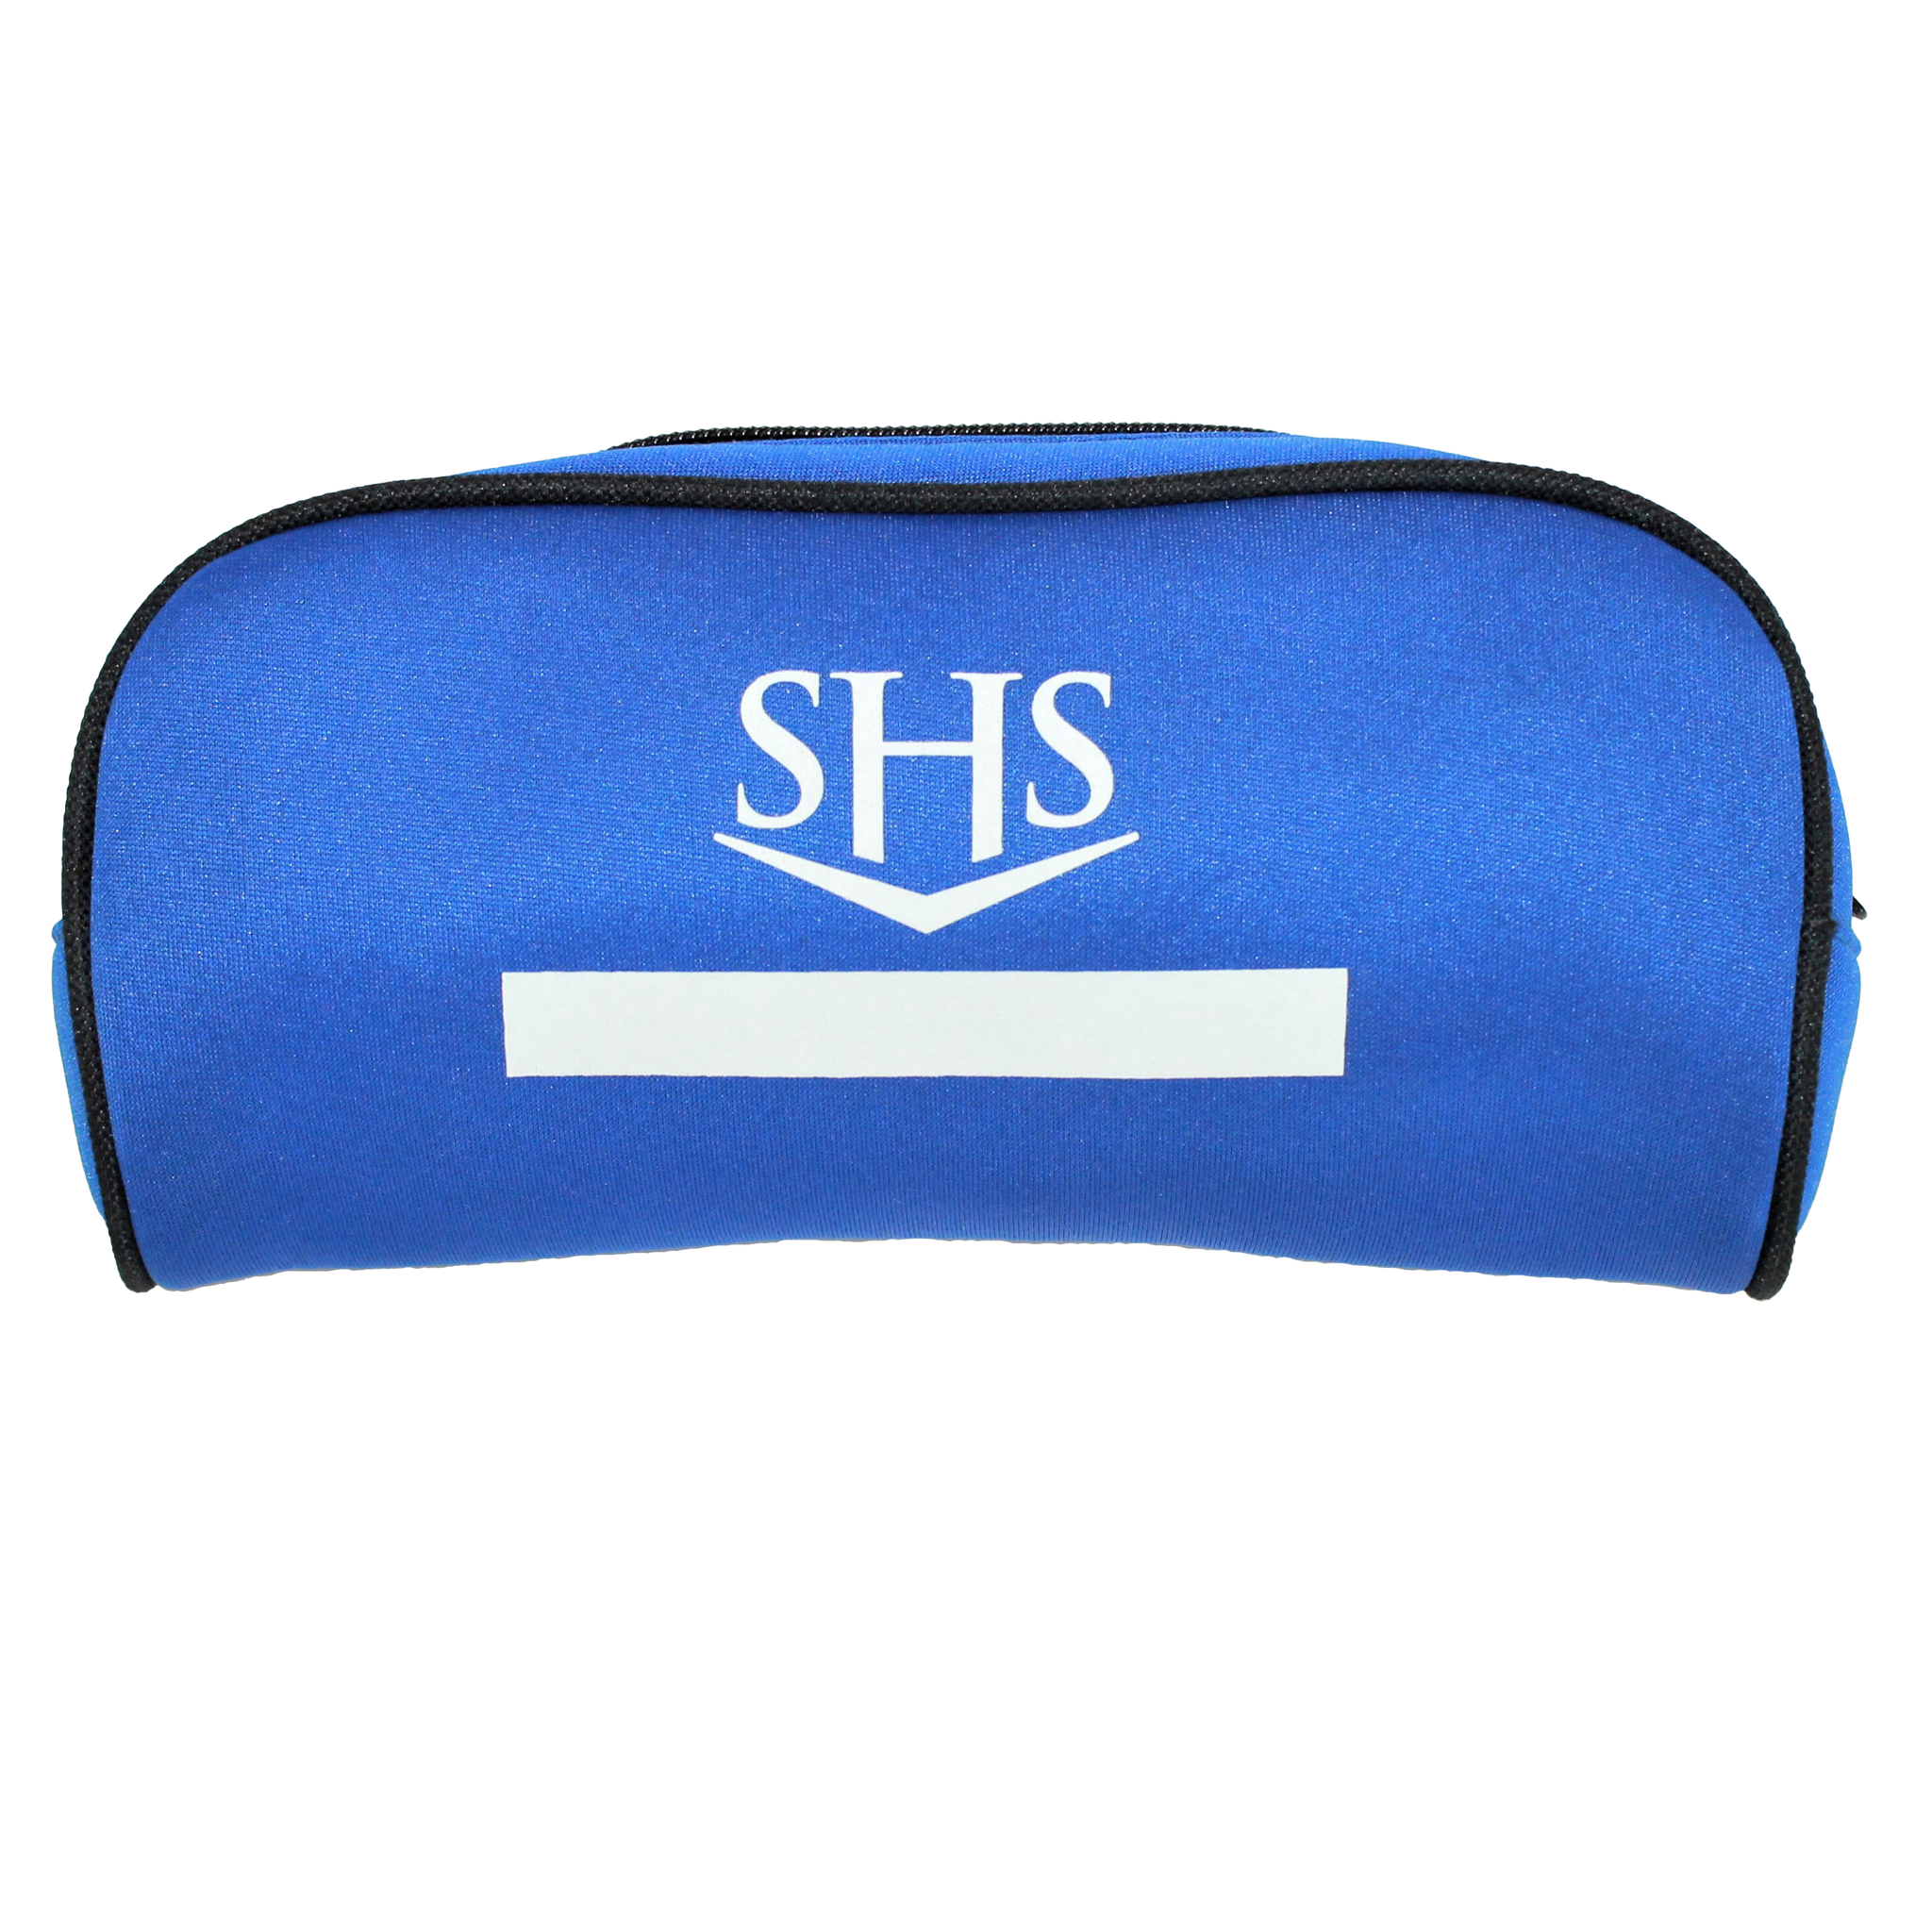 SHS Neoprene Pencil Case with Name Plate